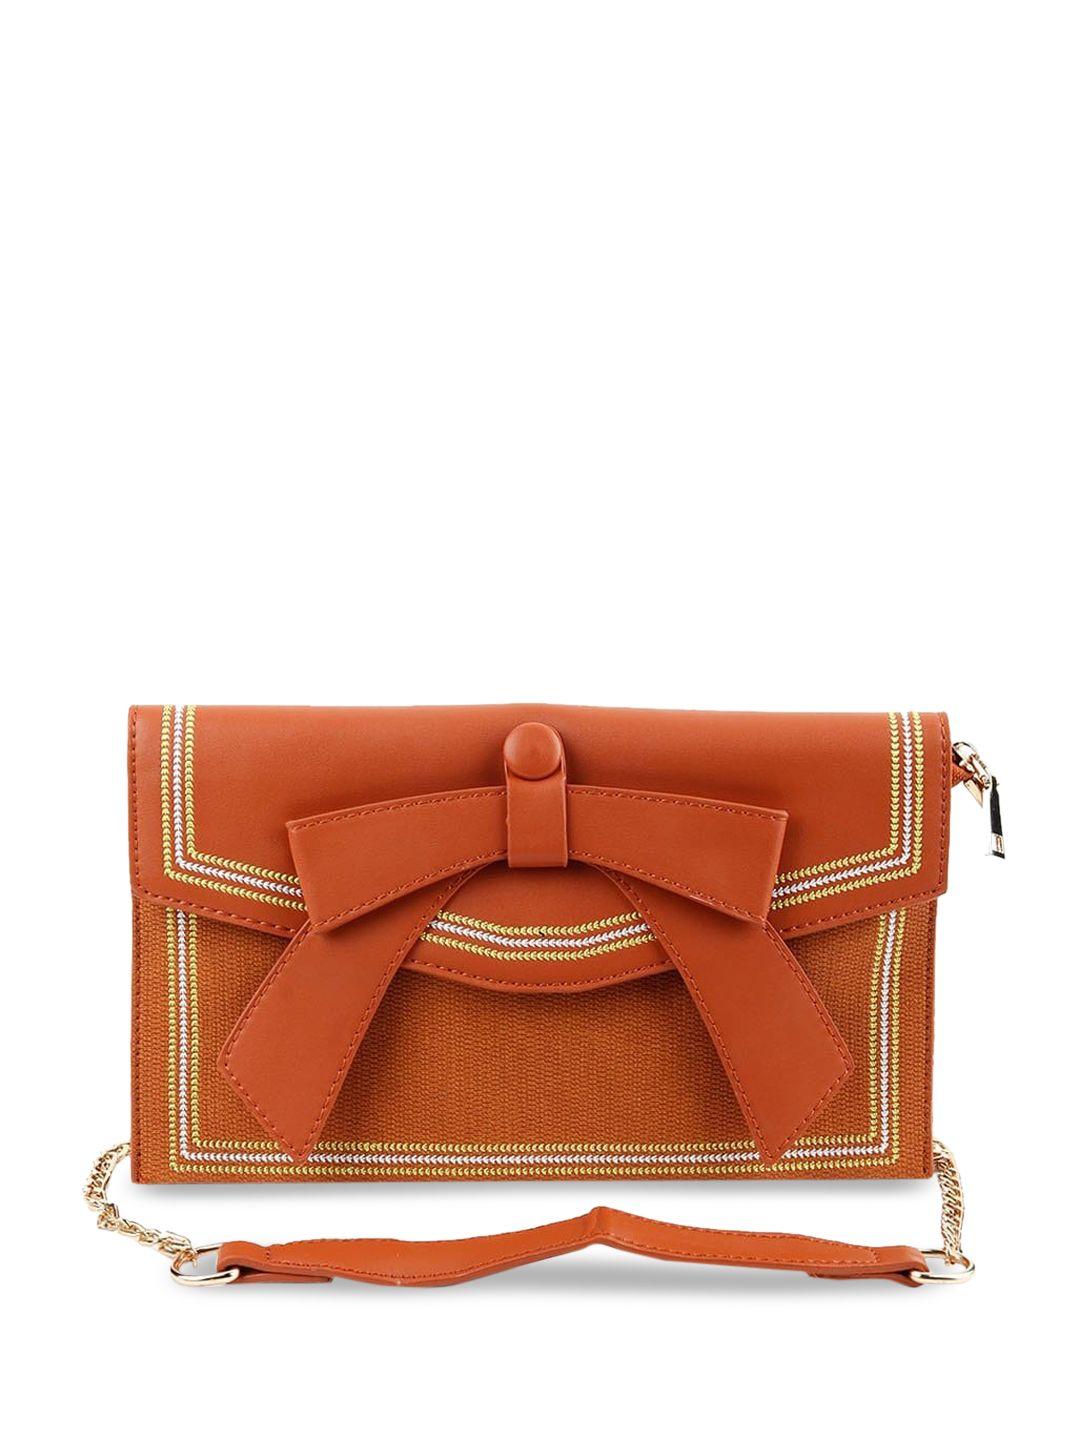 odette brown & yellow leather structured sling bag with bow detail